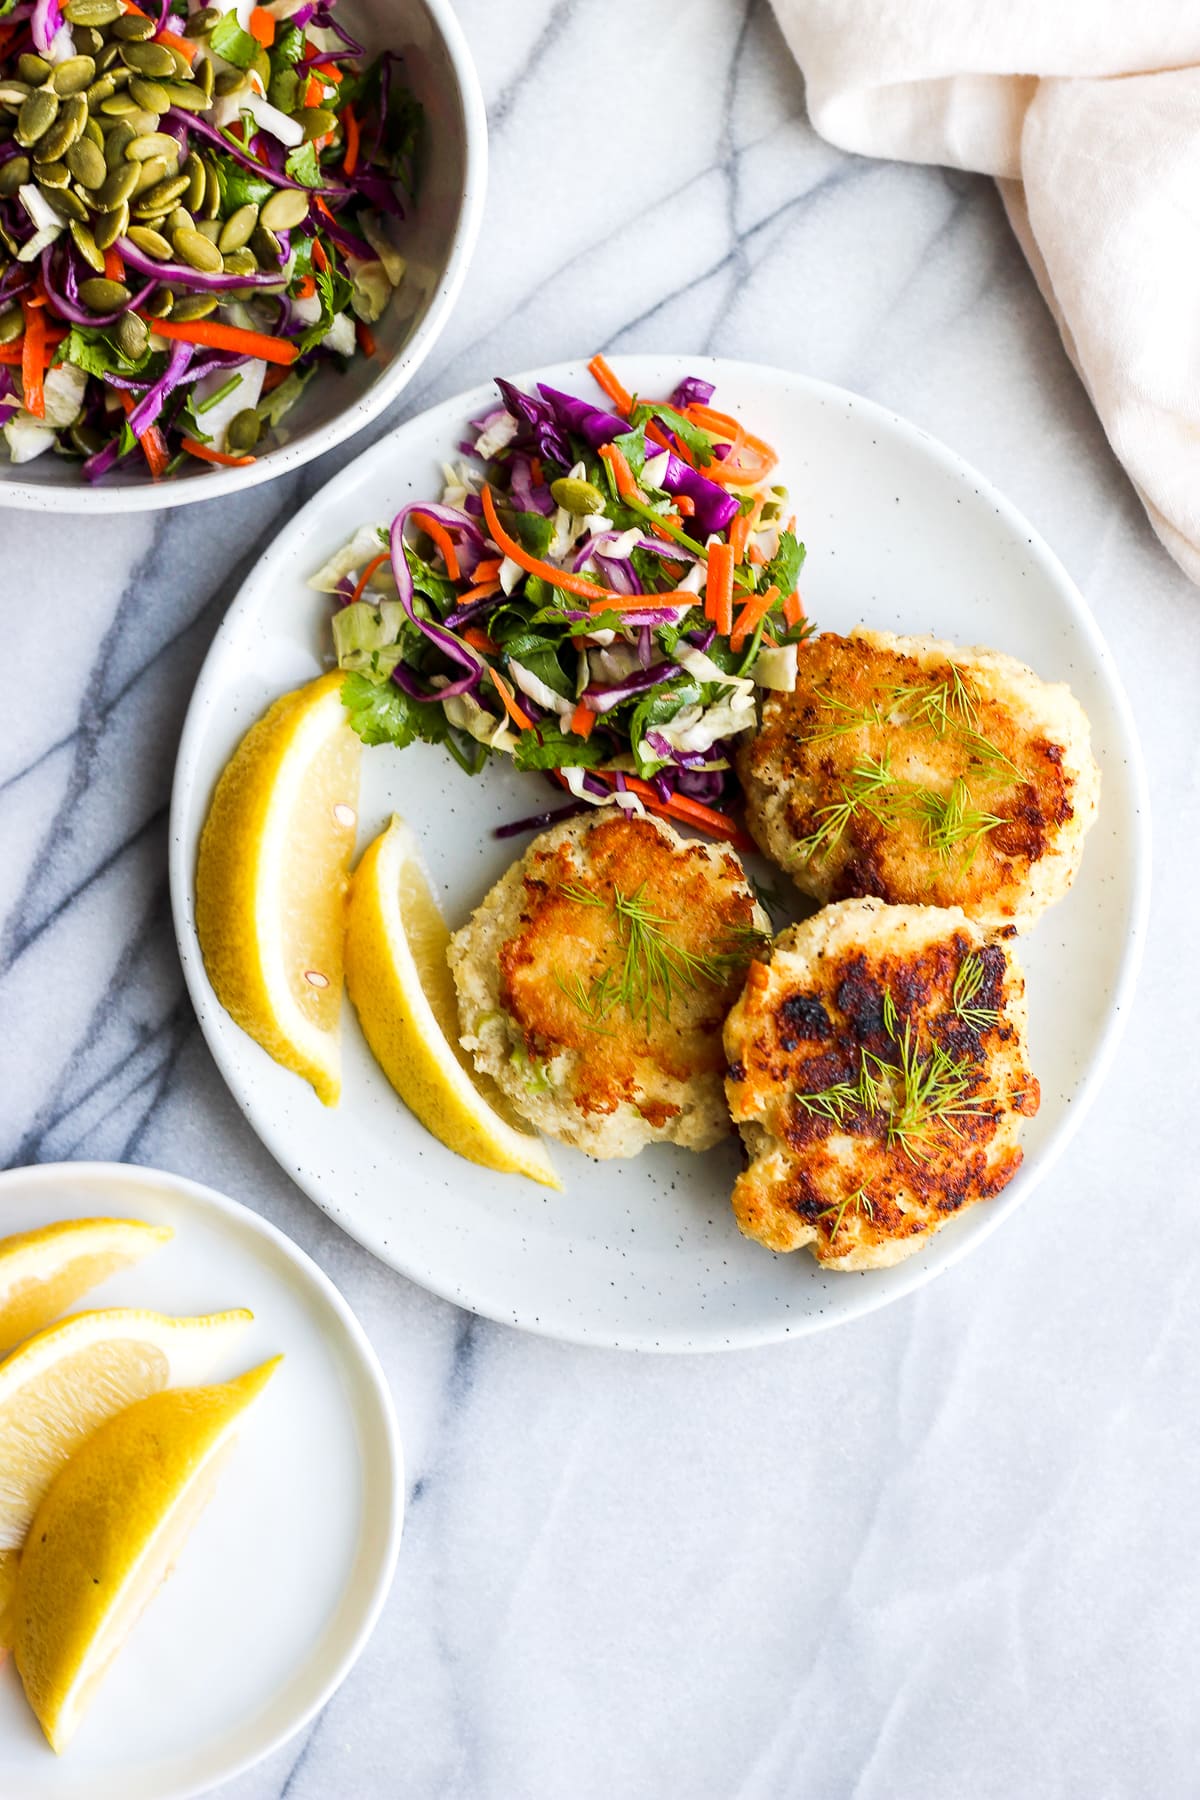 Cod Cakes on a plate with a side salad.